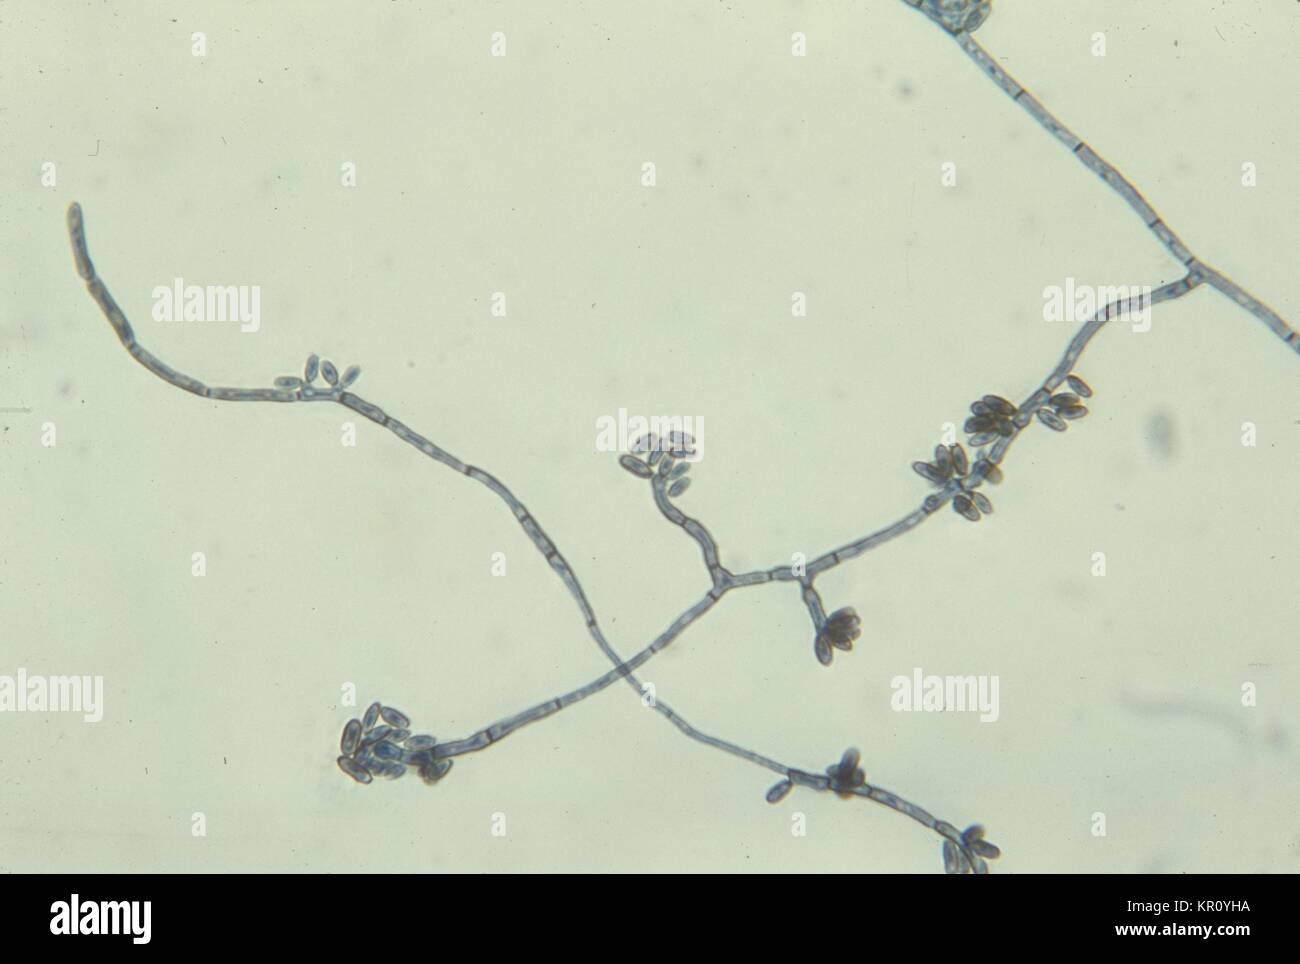 This is a micrograph depicting the fungus Hortaea werneckii, magnified 475X, 1964. Colonies of the species Hortaea werneckii, formerly Cladosporium werneckii, are slow growing, initially mucoid, yeast-like and shiny black. This fungus is a causative agent of tinea nigra in humans. Image courtesy CDC/Dr. Lucille K. Georg. Stock Photo